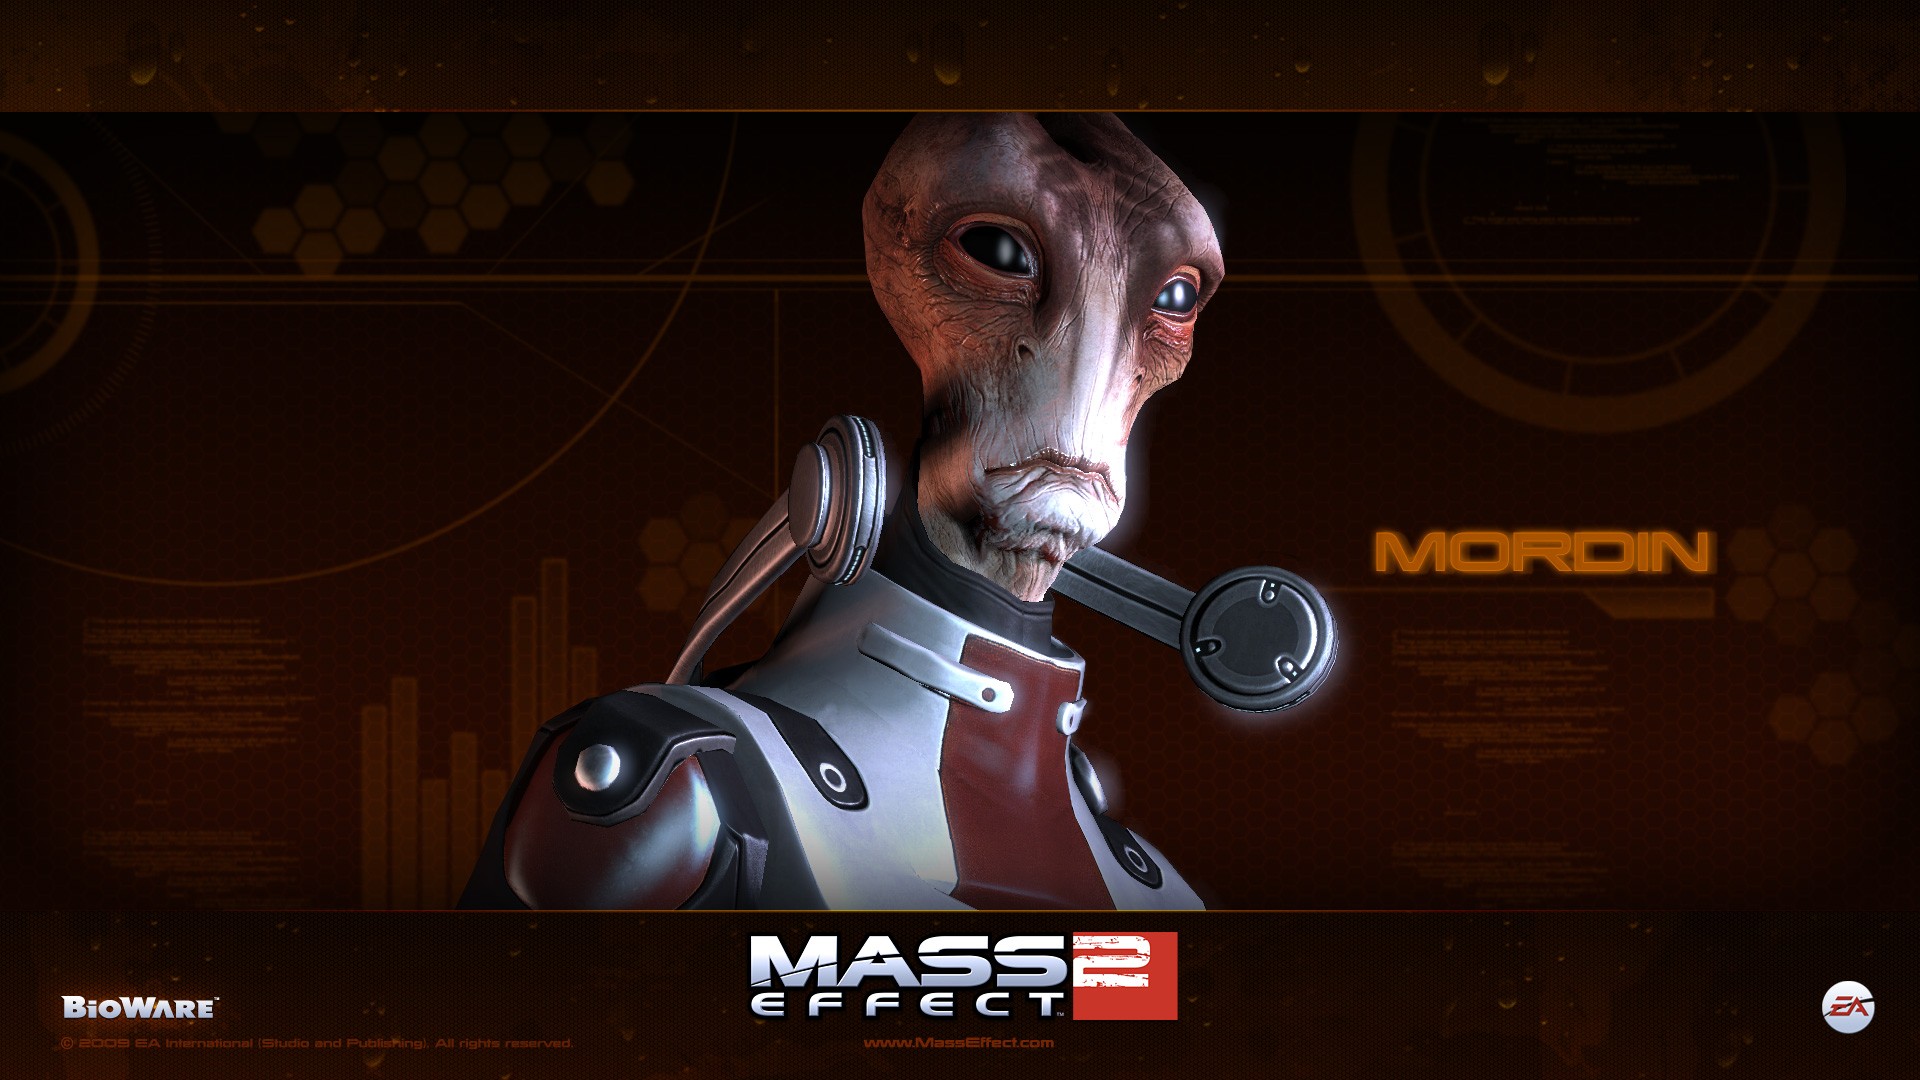 General 1920x1080 Mass Effect 2 Bioware video games PC gaming Electronic Arts science fiction